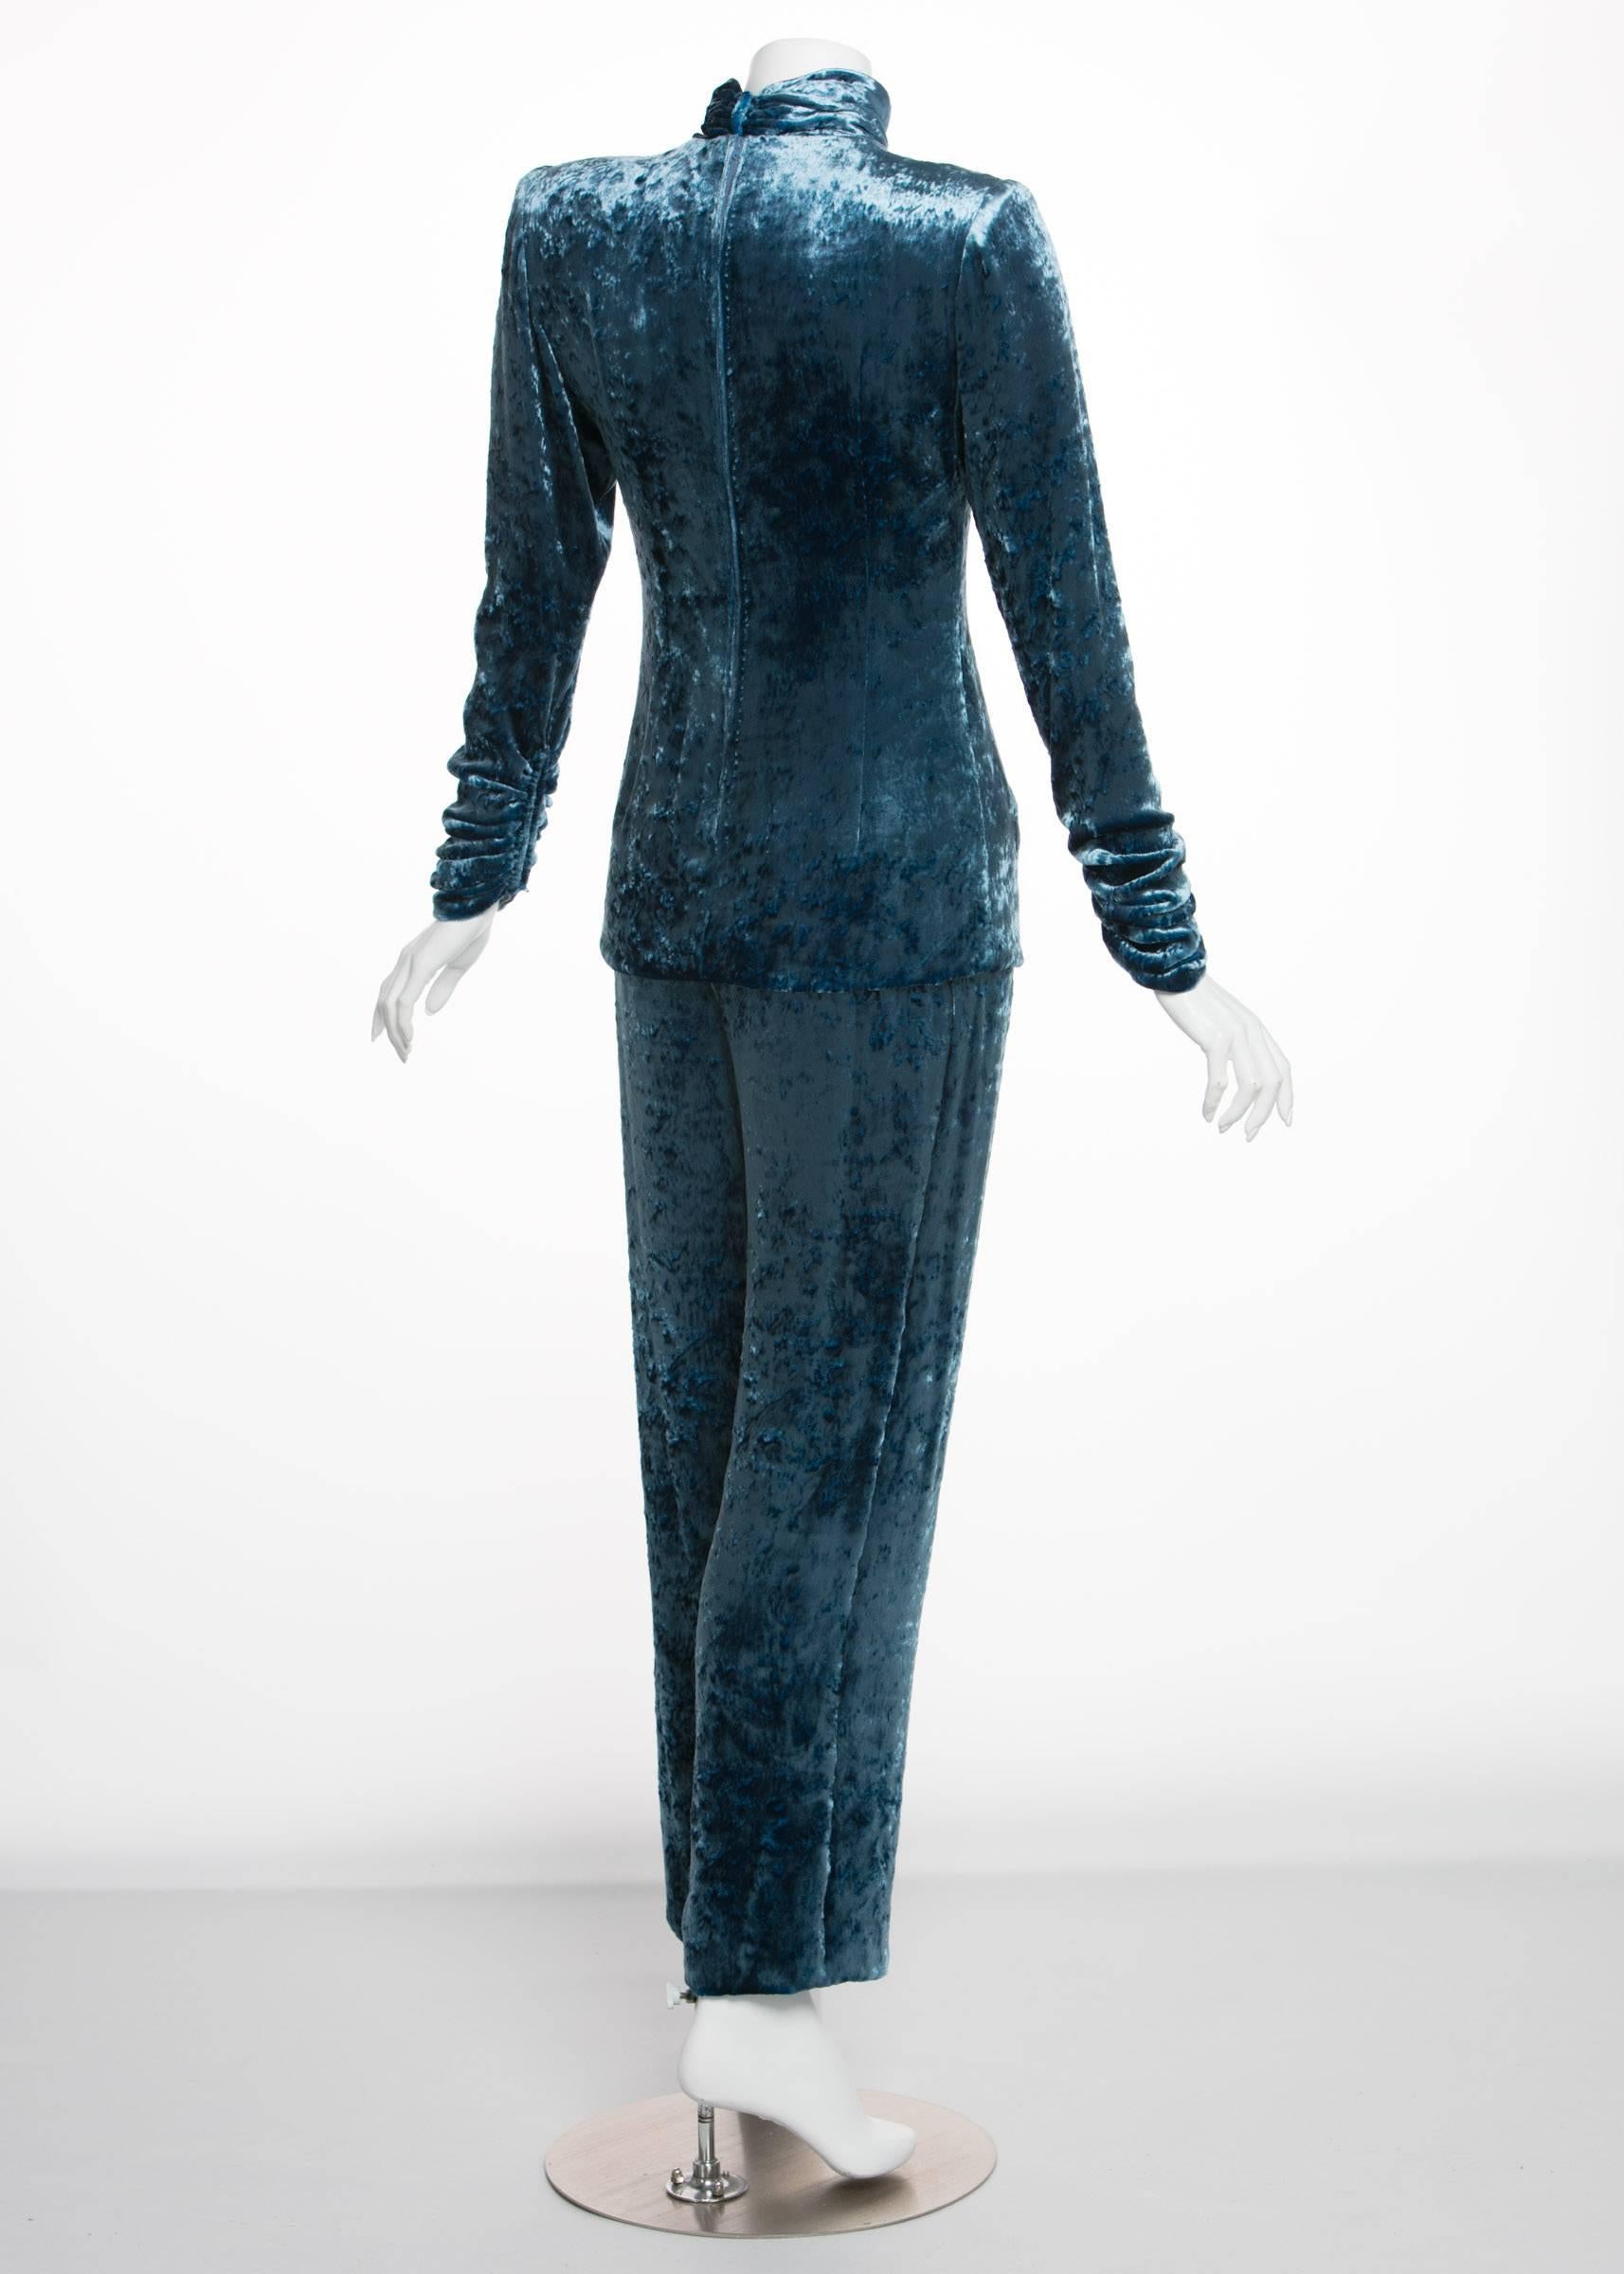 Galanos Couture Blue Velvet Evening Tunic Top Pants Suit, 1980s  In Excellent Condition For Sale In Boca Raton, FL